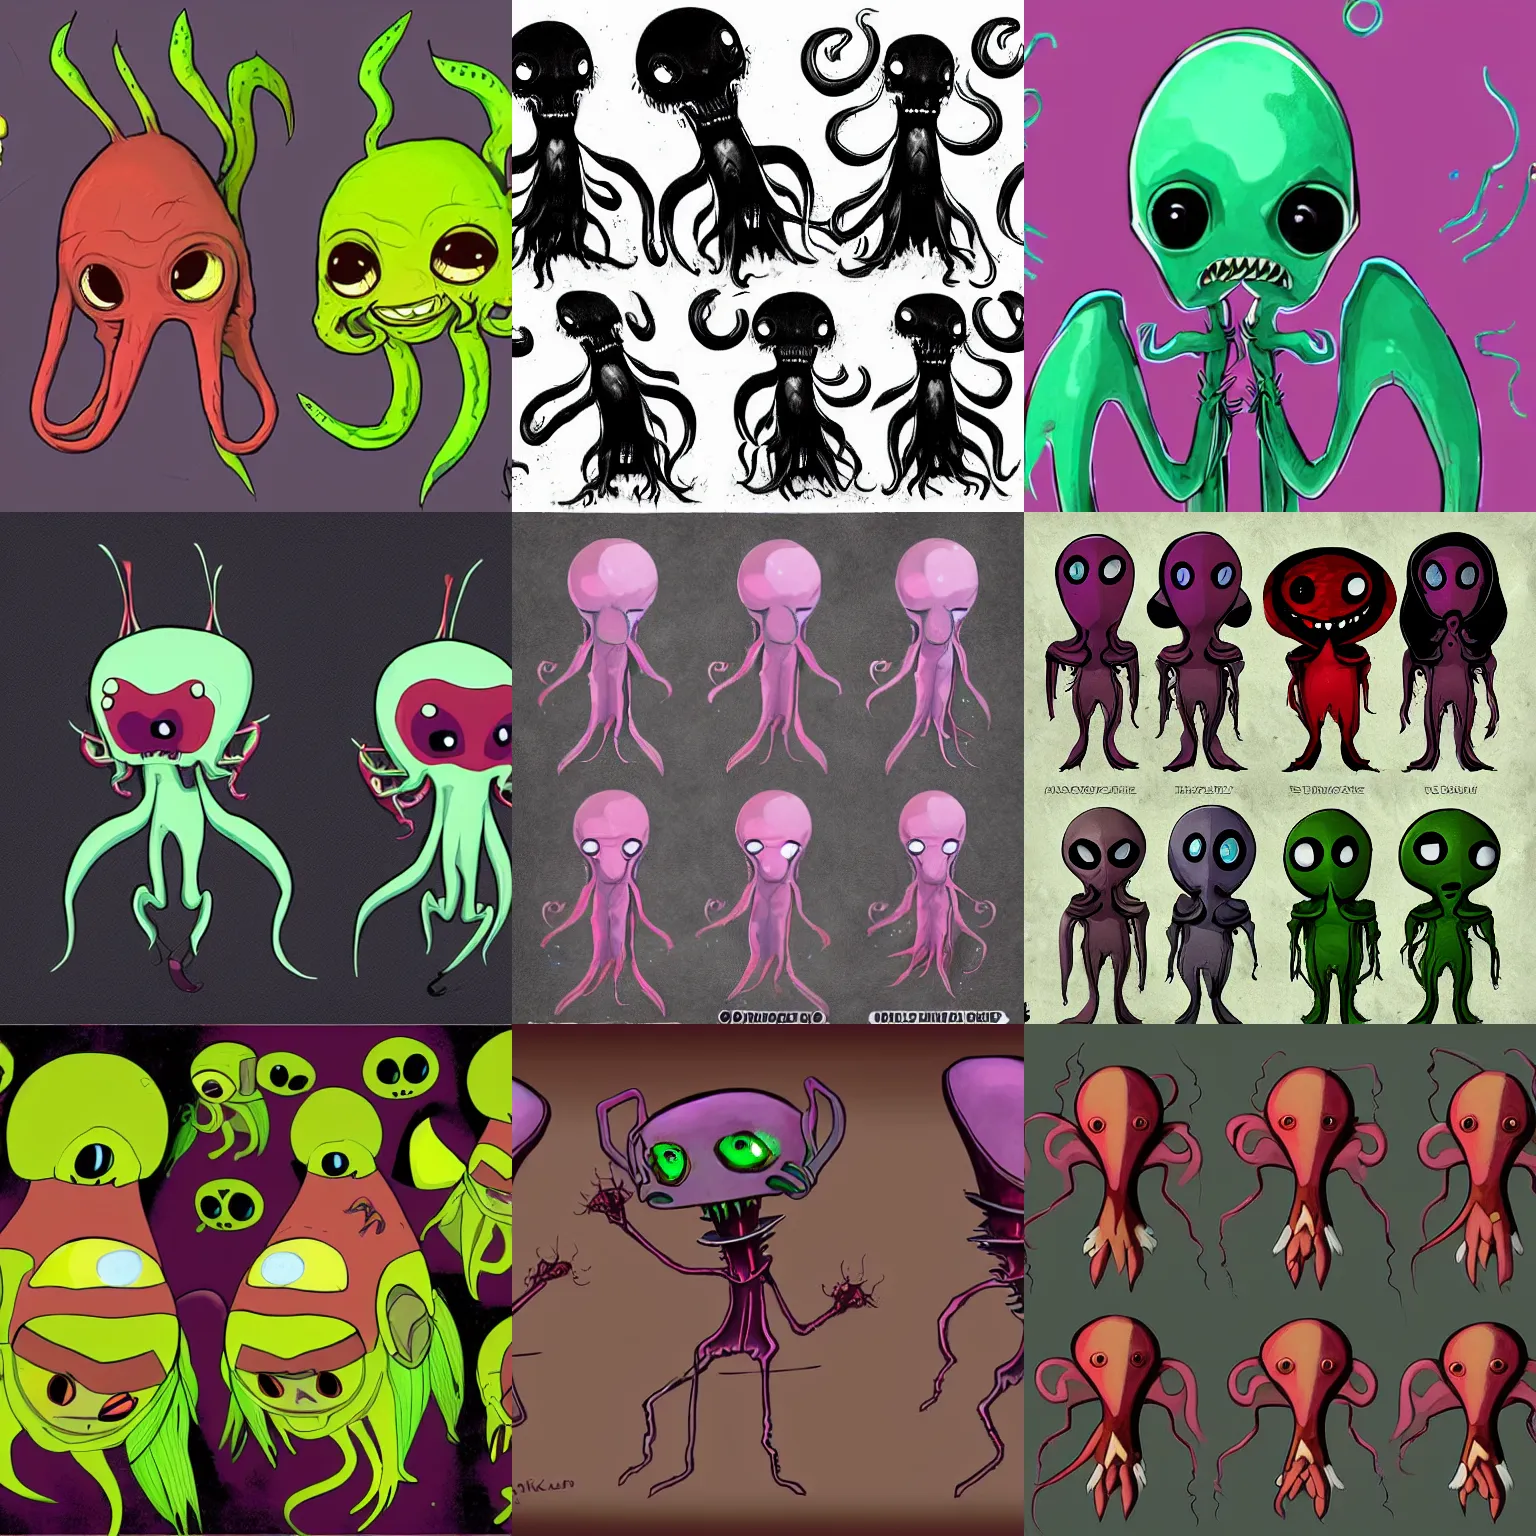 Prompt: little ampire squid alien character designs for the newest psychonauts video game made by double fine done by tim shafer with help from the artist for the band gorrilaz